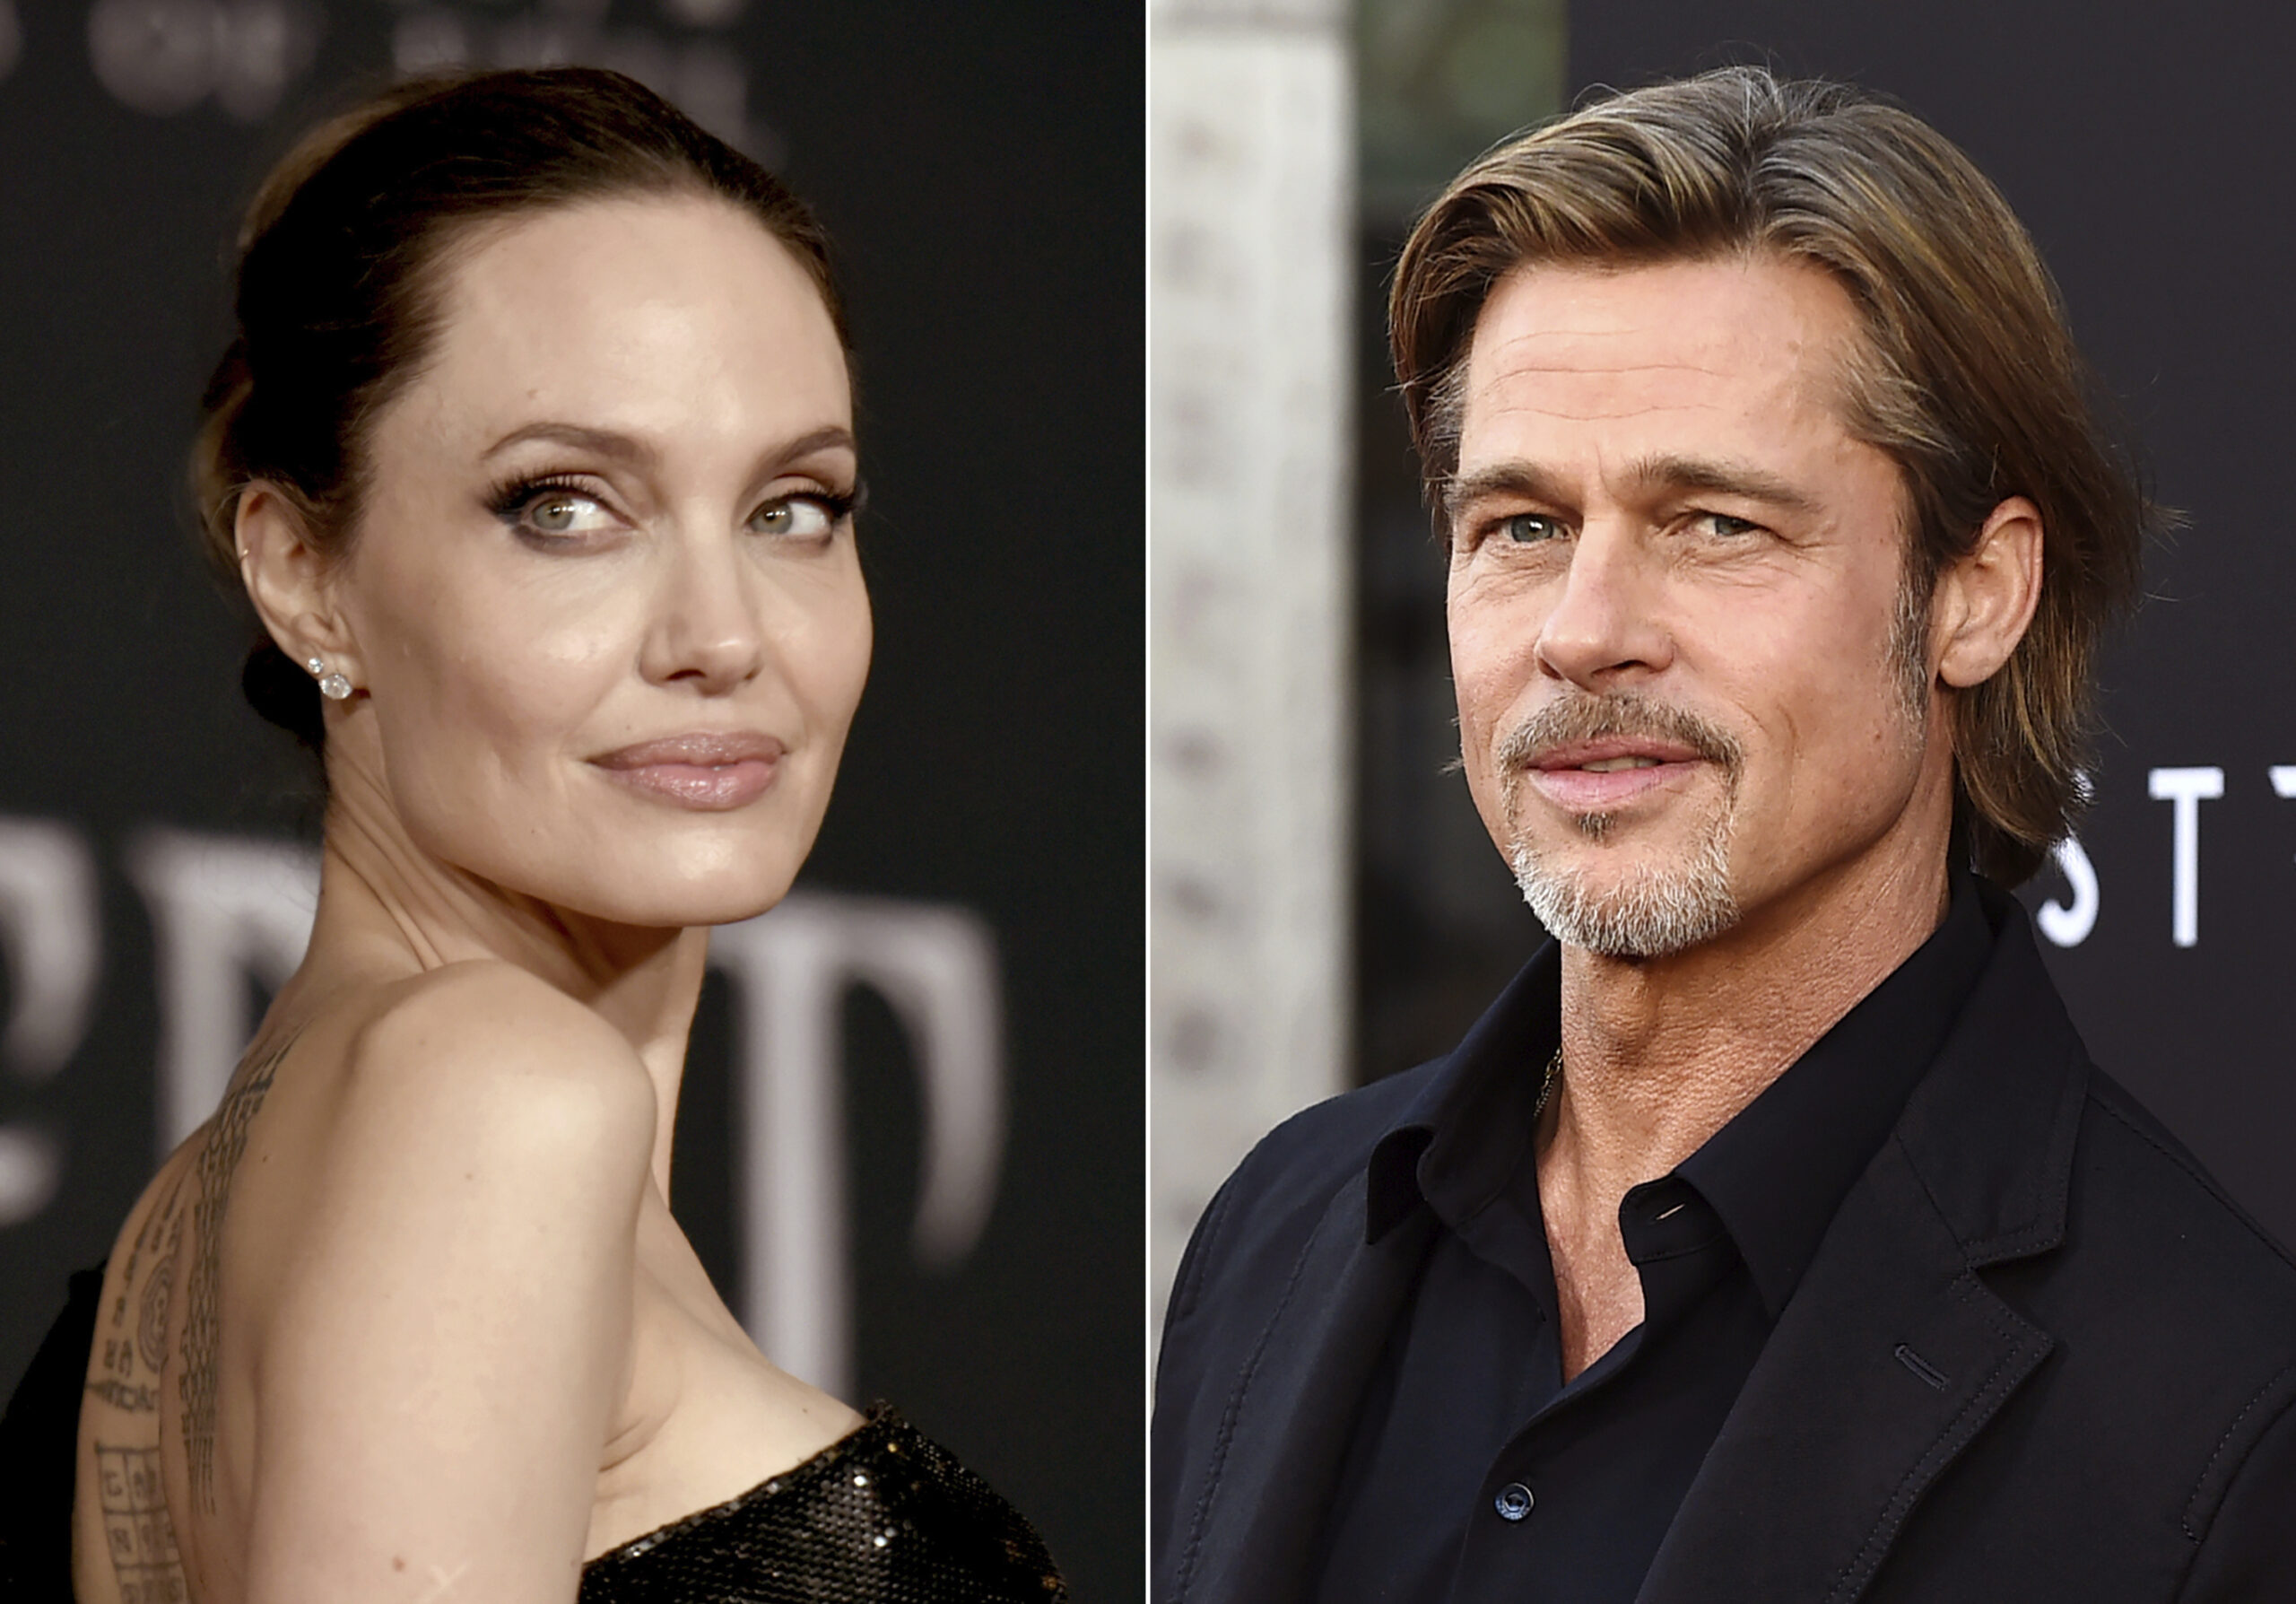 This combination photo shows Angelina Jolie at a premiere in Los Angeles on Sept. 30, 2019, left, and Brad Pitt at a special screening on Sept. 18, 2019. Jolie criticized a judge deciding on custody arrangements for her and Pitt’s children during their divorce, saying in a court filing on Monday, May 24, 2021, that the judge refused to allow their kids to testify. (AP Photo/File)